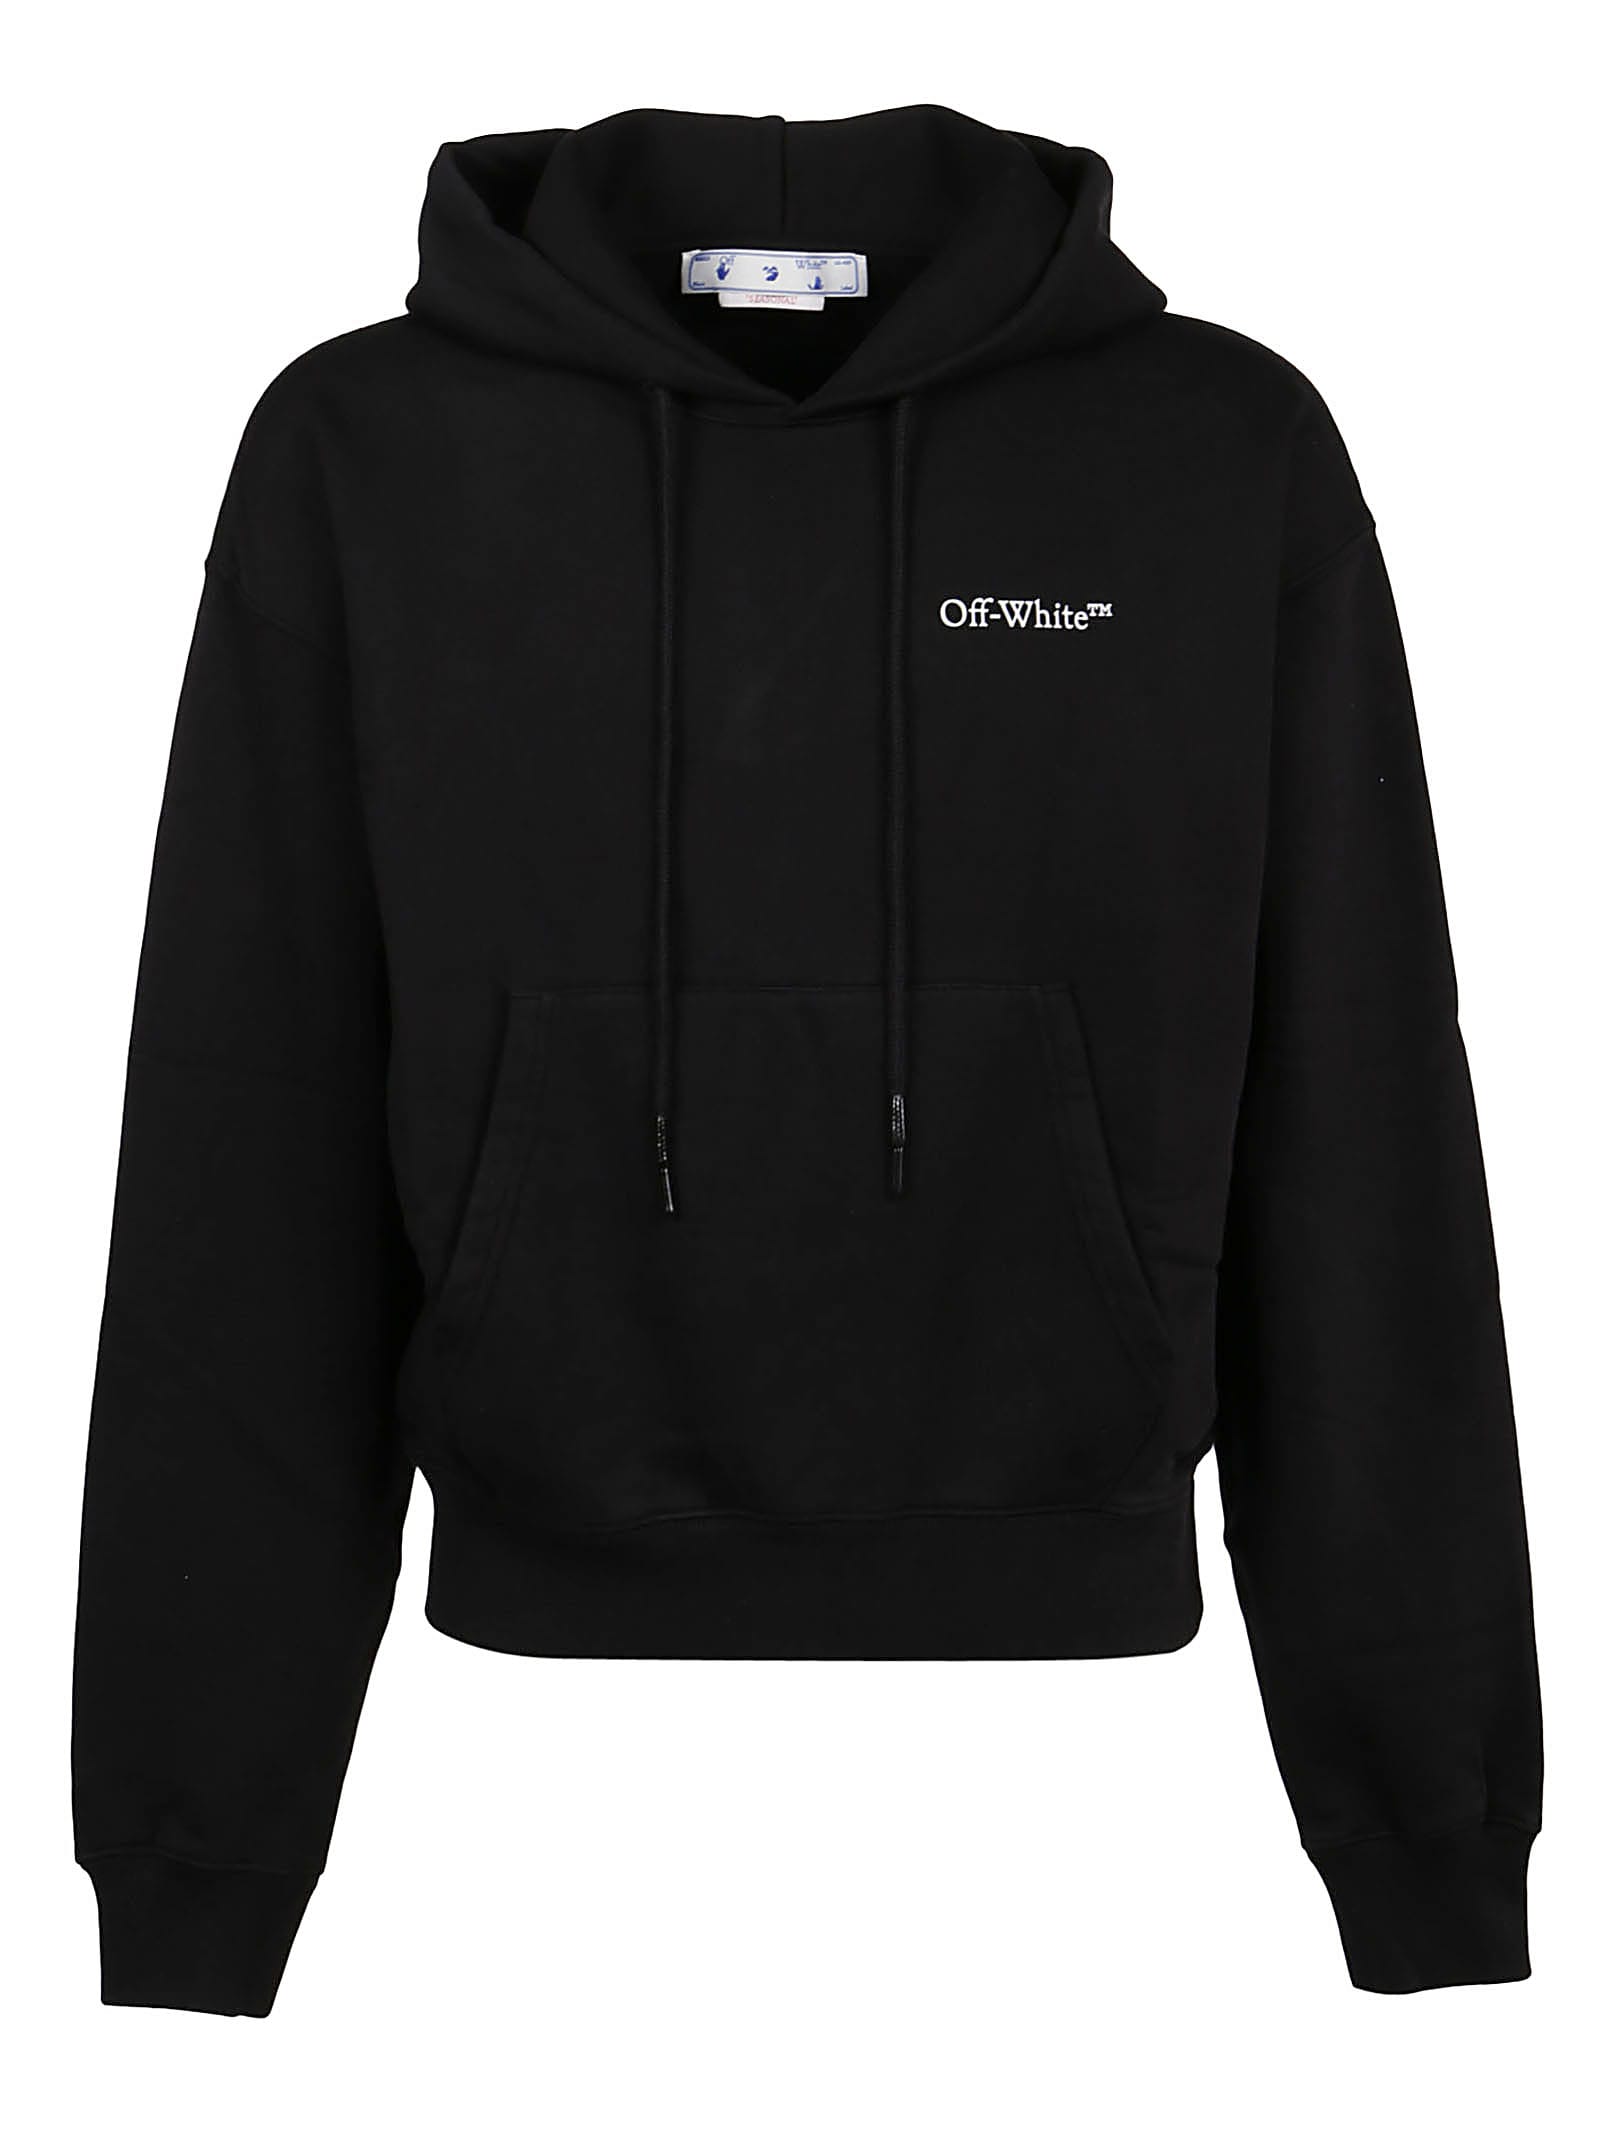 Off-White Caravag Crowning Over Sweatshirt